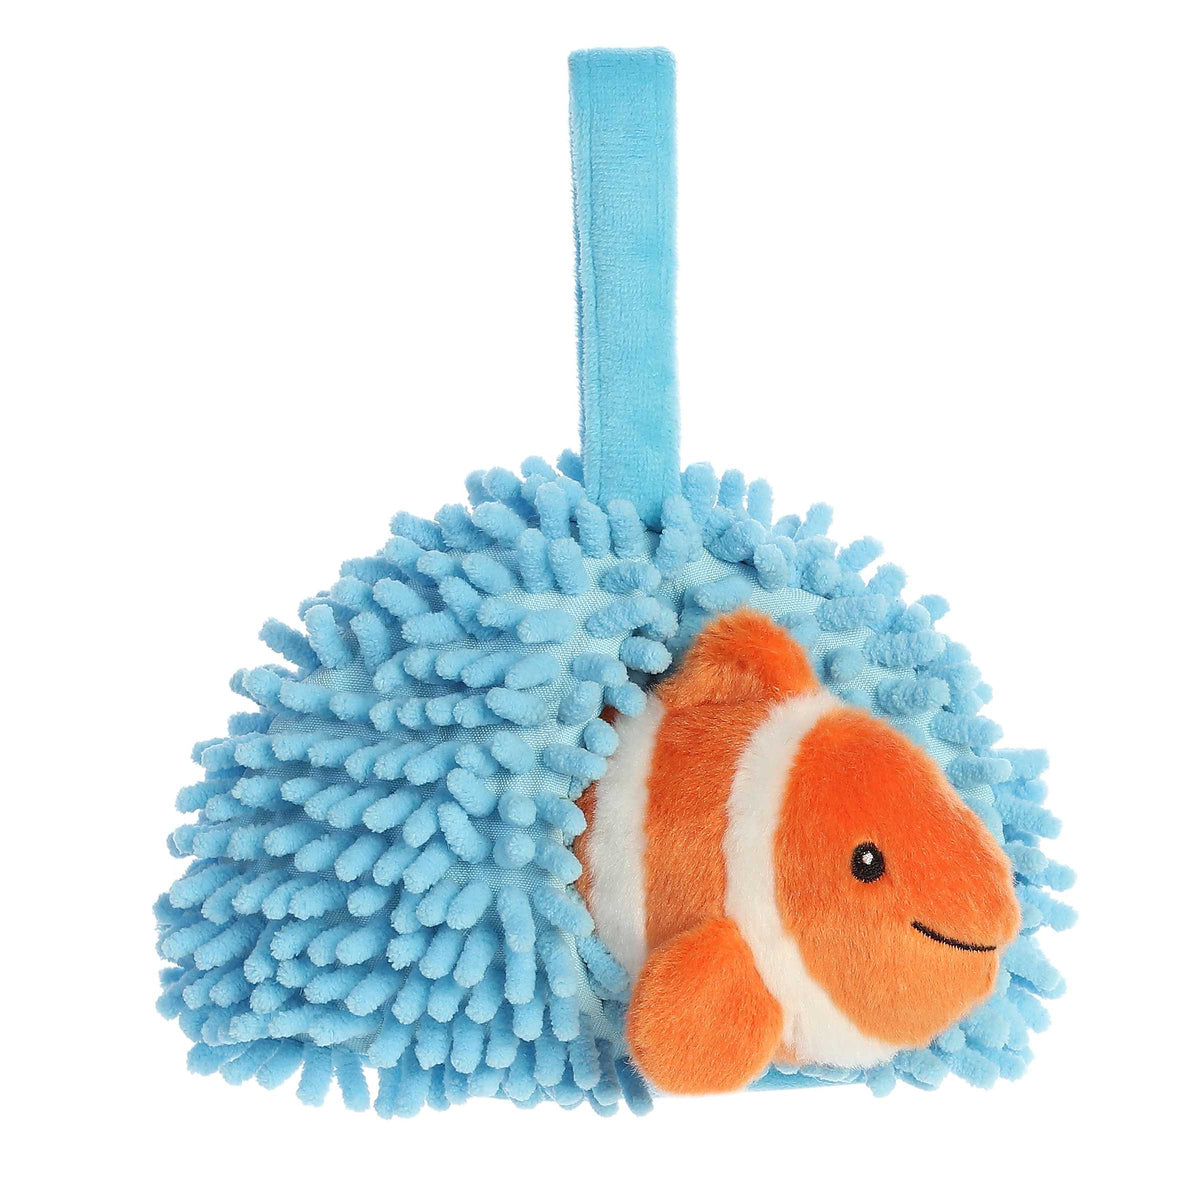 Coral Reef Clown Fish plush from Hideouts, offering cozy play and a creative marine hideout.